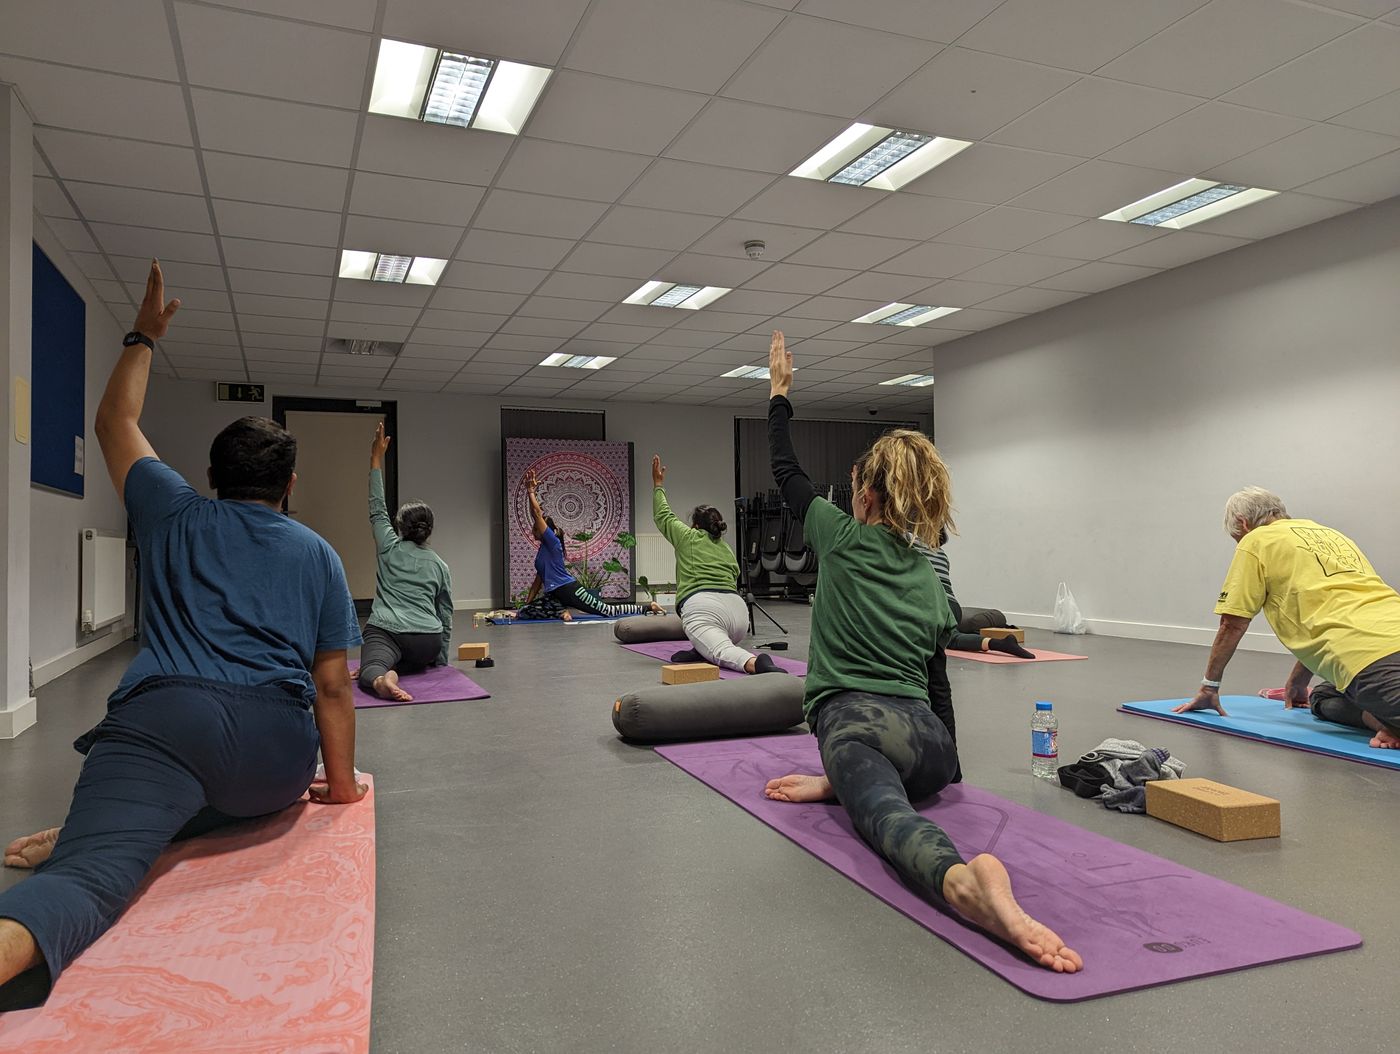 Soham Yoga London -Authentic Yoga at its Purest form
Blissful, gentle and Calm Yin Yoga  last Tuesday. [@bua](/u/bua)
Join us for being fit and peaceful.
https://sohamyoga.co.uk/